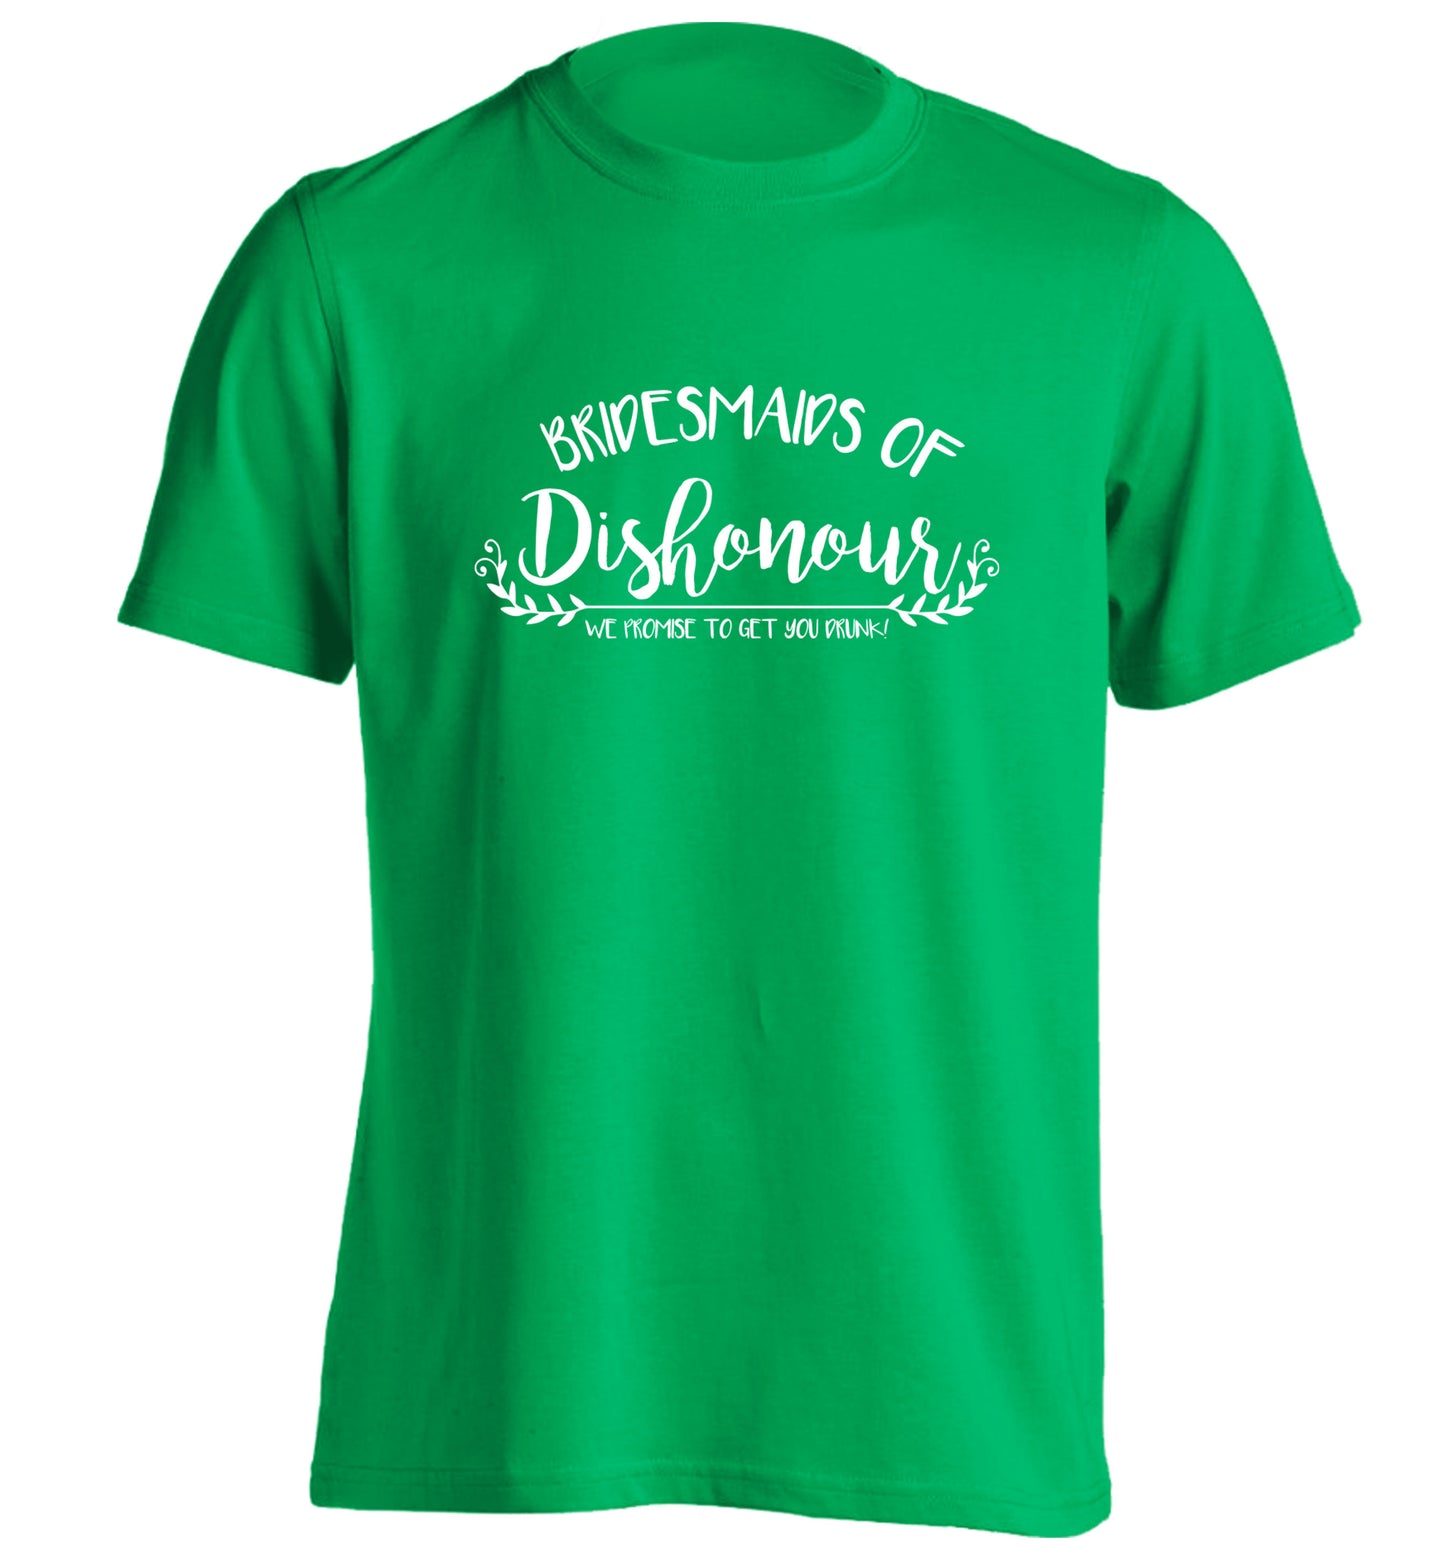 Bridesmaids of Dishonour we promise to get you drunk! adults unisex green Tshirt 2XL